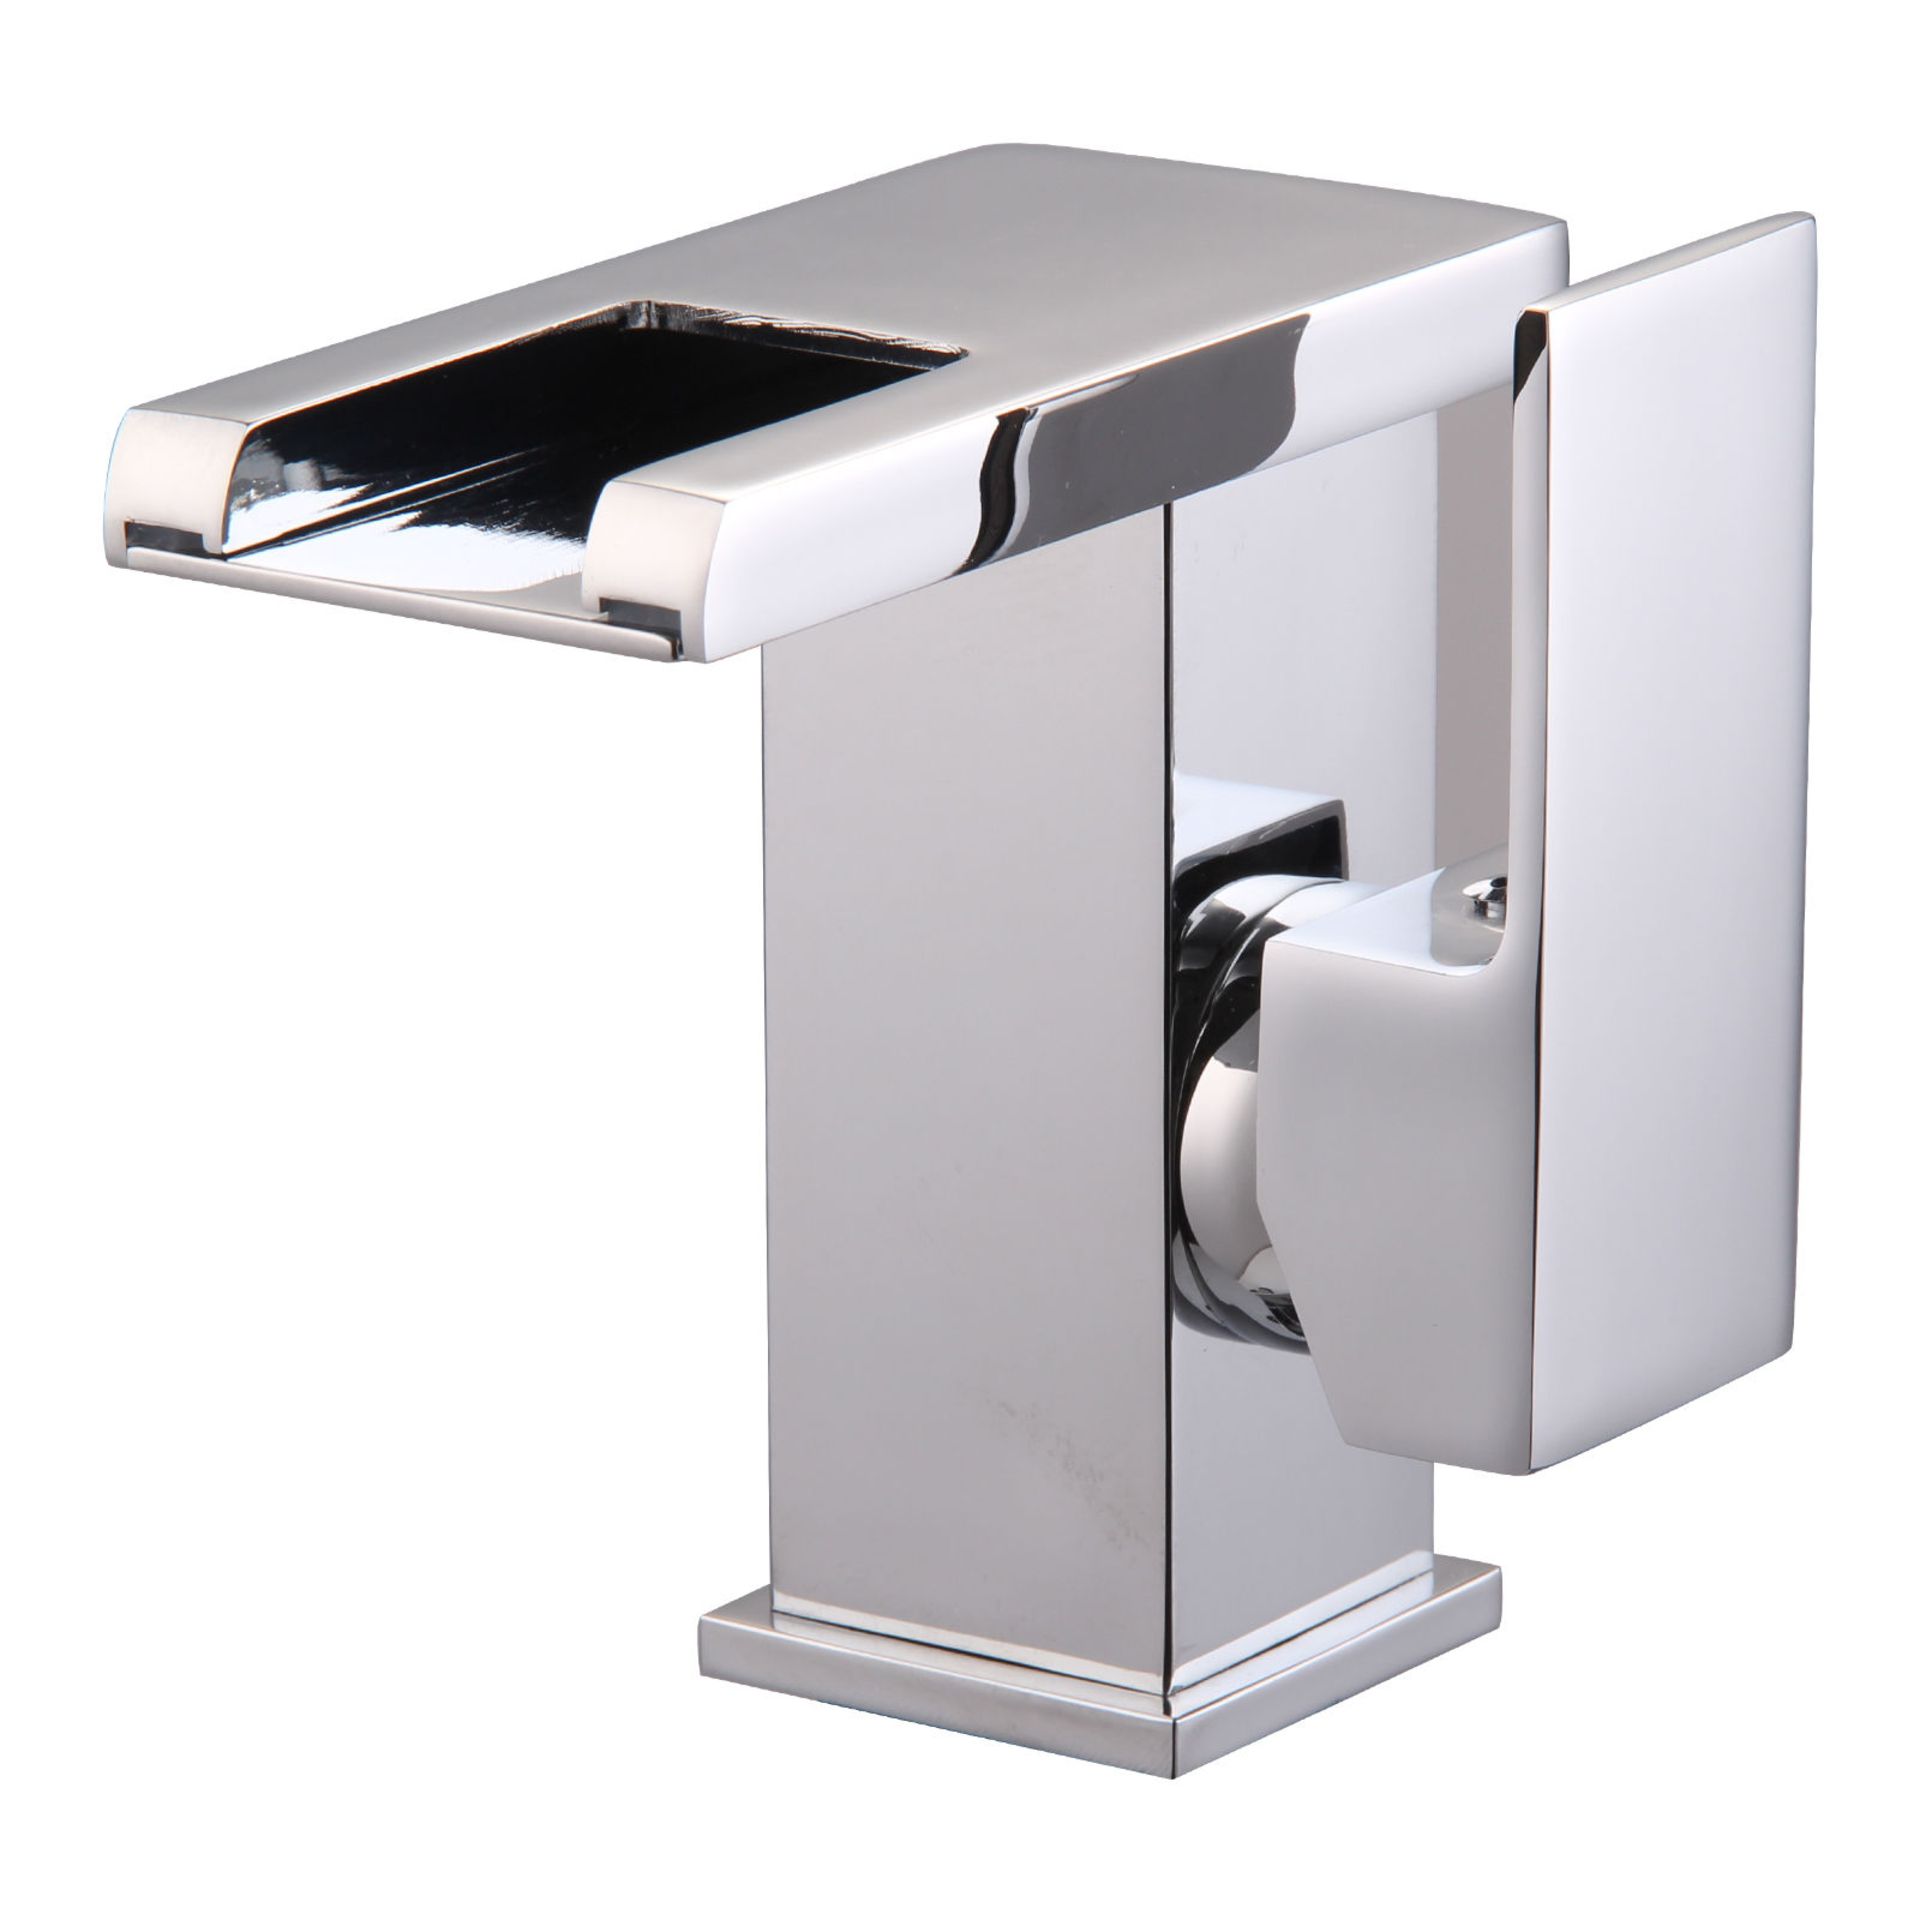 (P270) LED Waterfall Bathroom Basin Mixer Tap. RRP £229.99. Easy to install and clean. All copper - Image 3 of 3